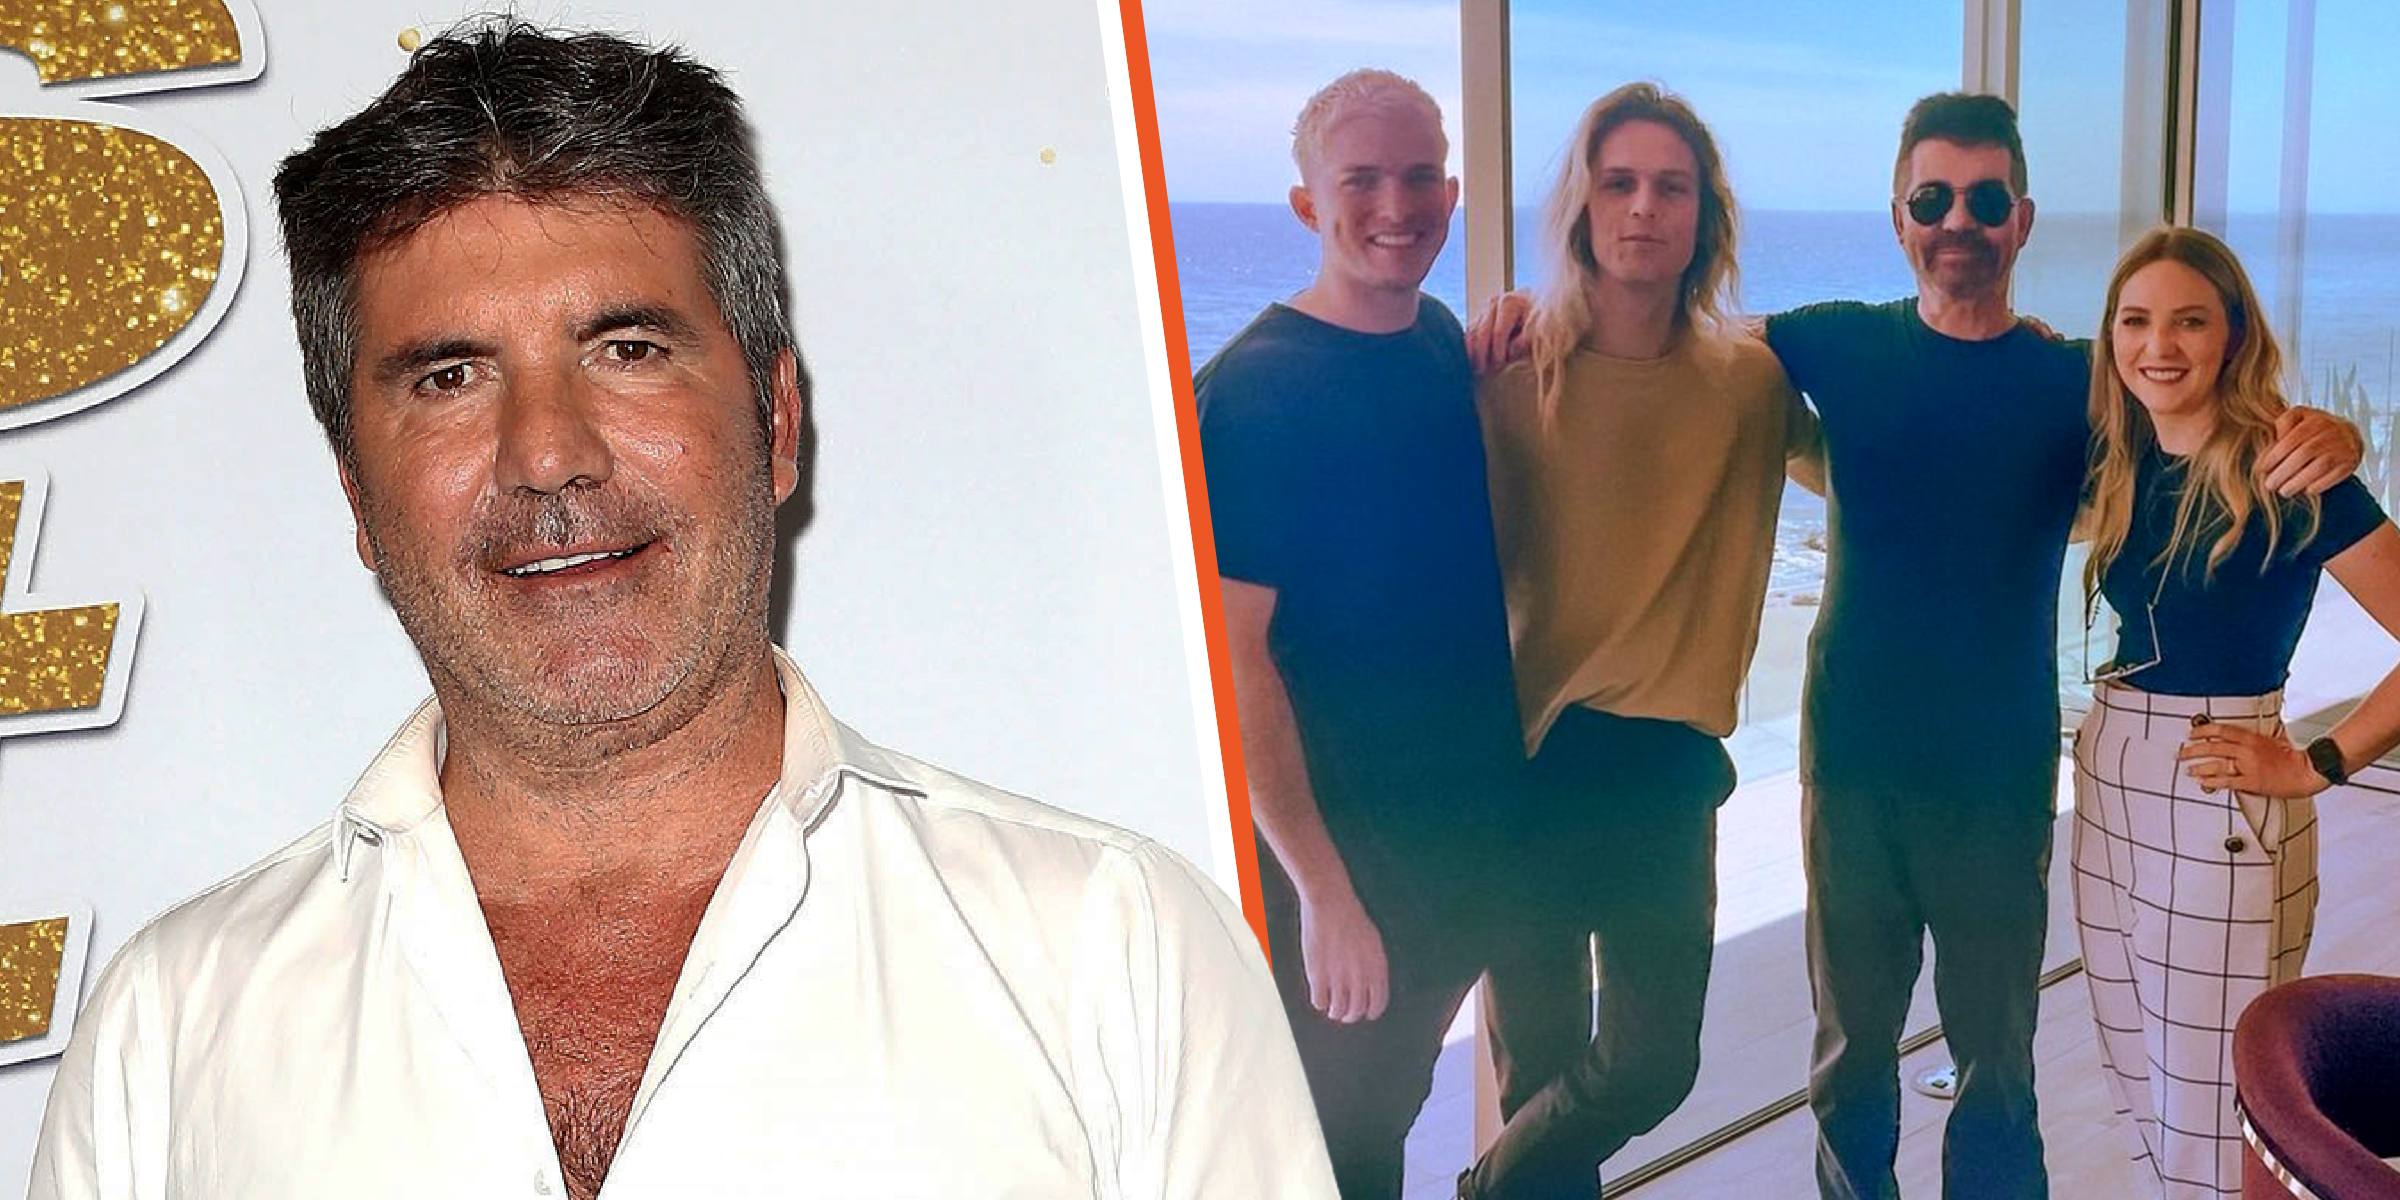 Simon Cowell | Source: Instagram/simoncowell / Getty Images